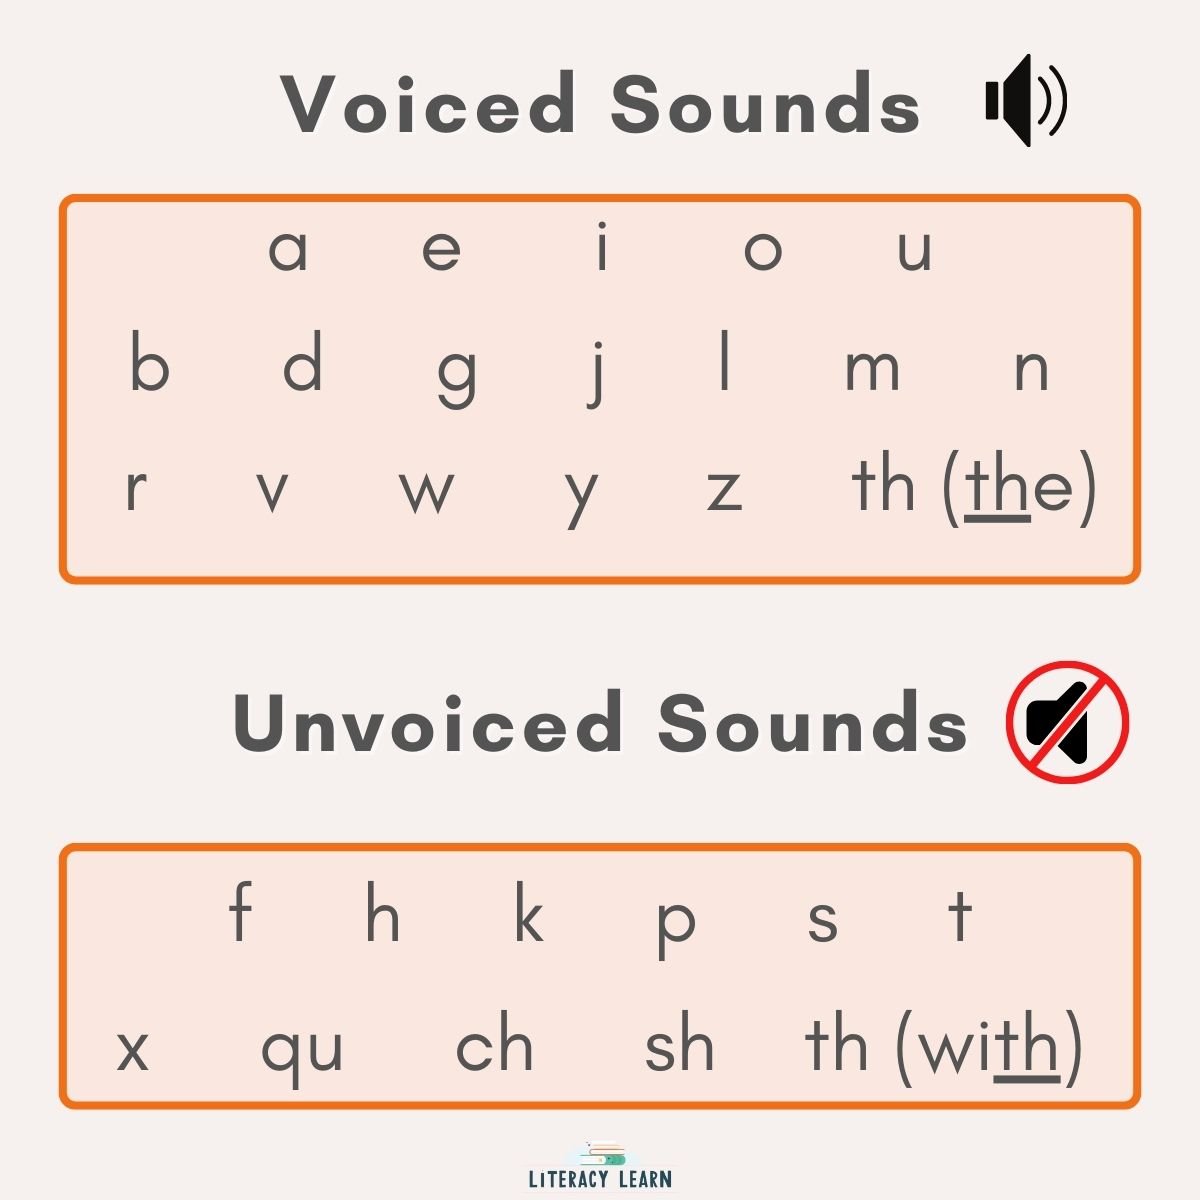 Graphic with all letters of the alphabet organized into voiced or unvoiced categories.